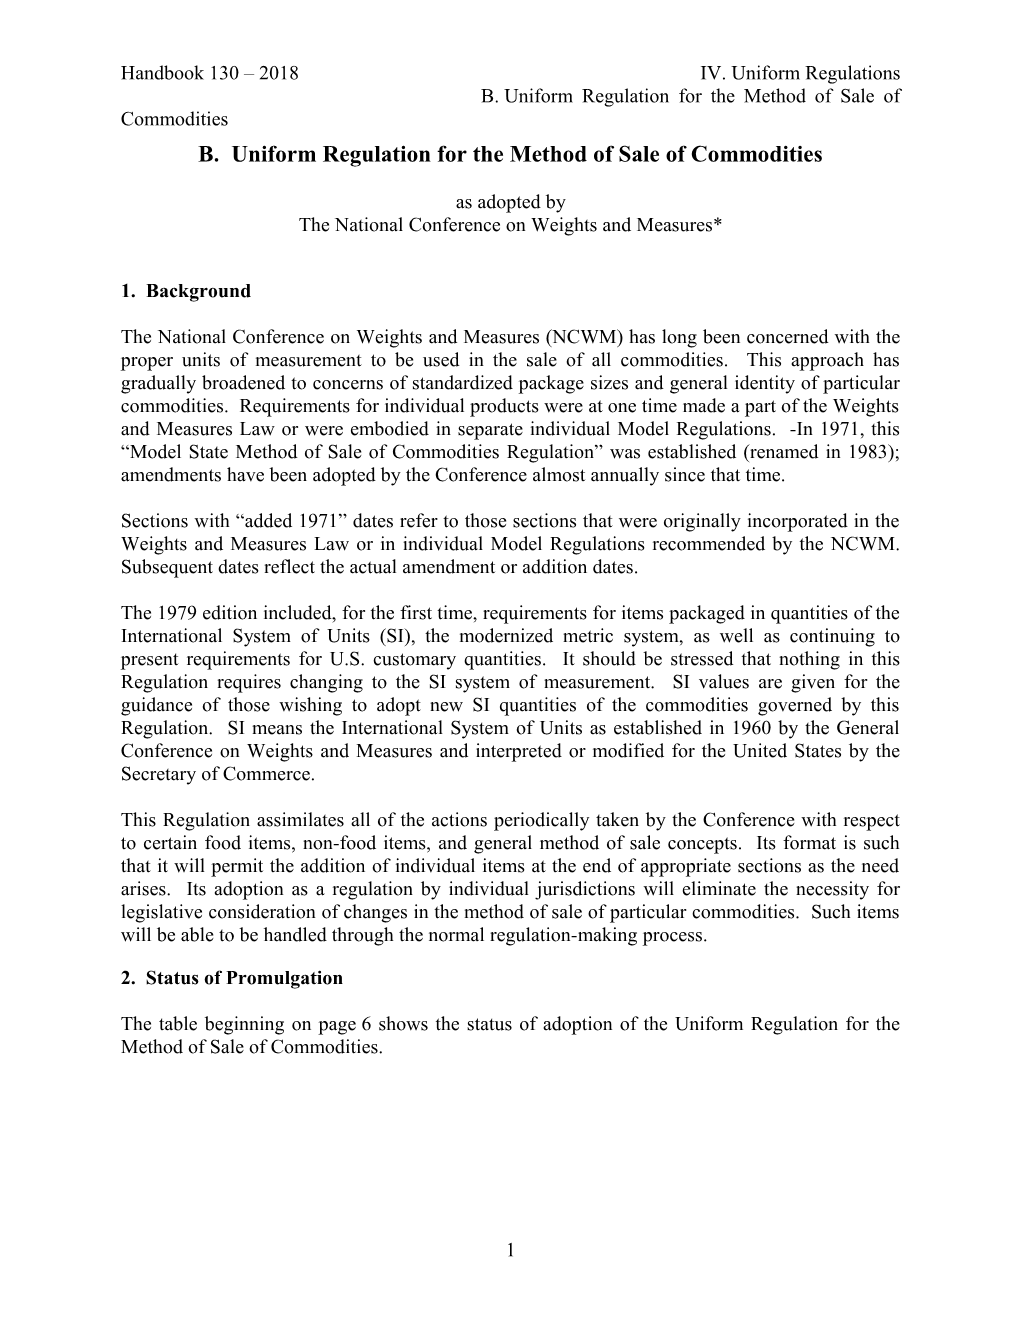 B.Uniform Regulation for the Method of Sale of Commodities